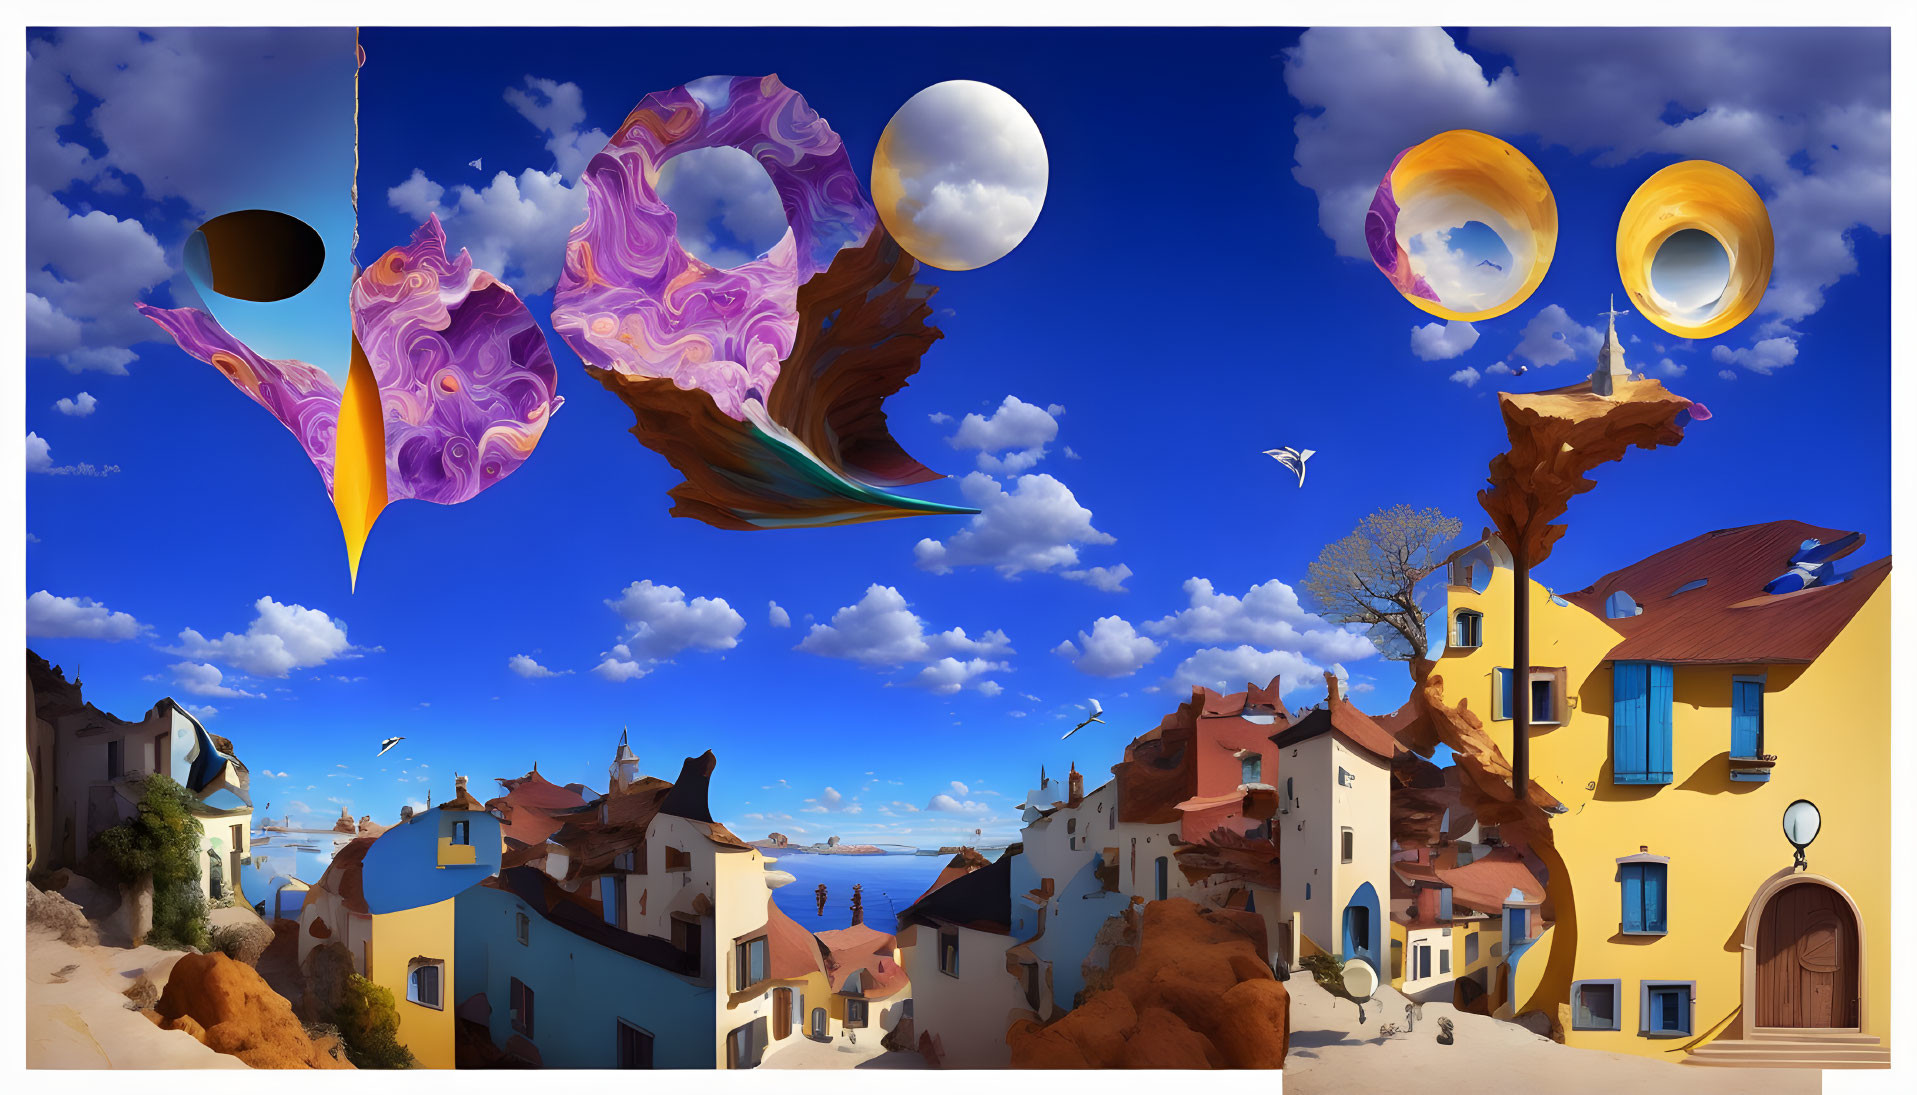 Colorful Floating Islands and Multiple Moons in Surreal Artwork